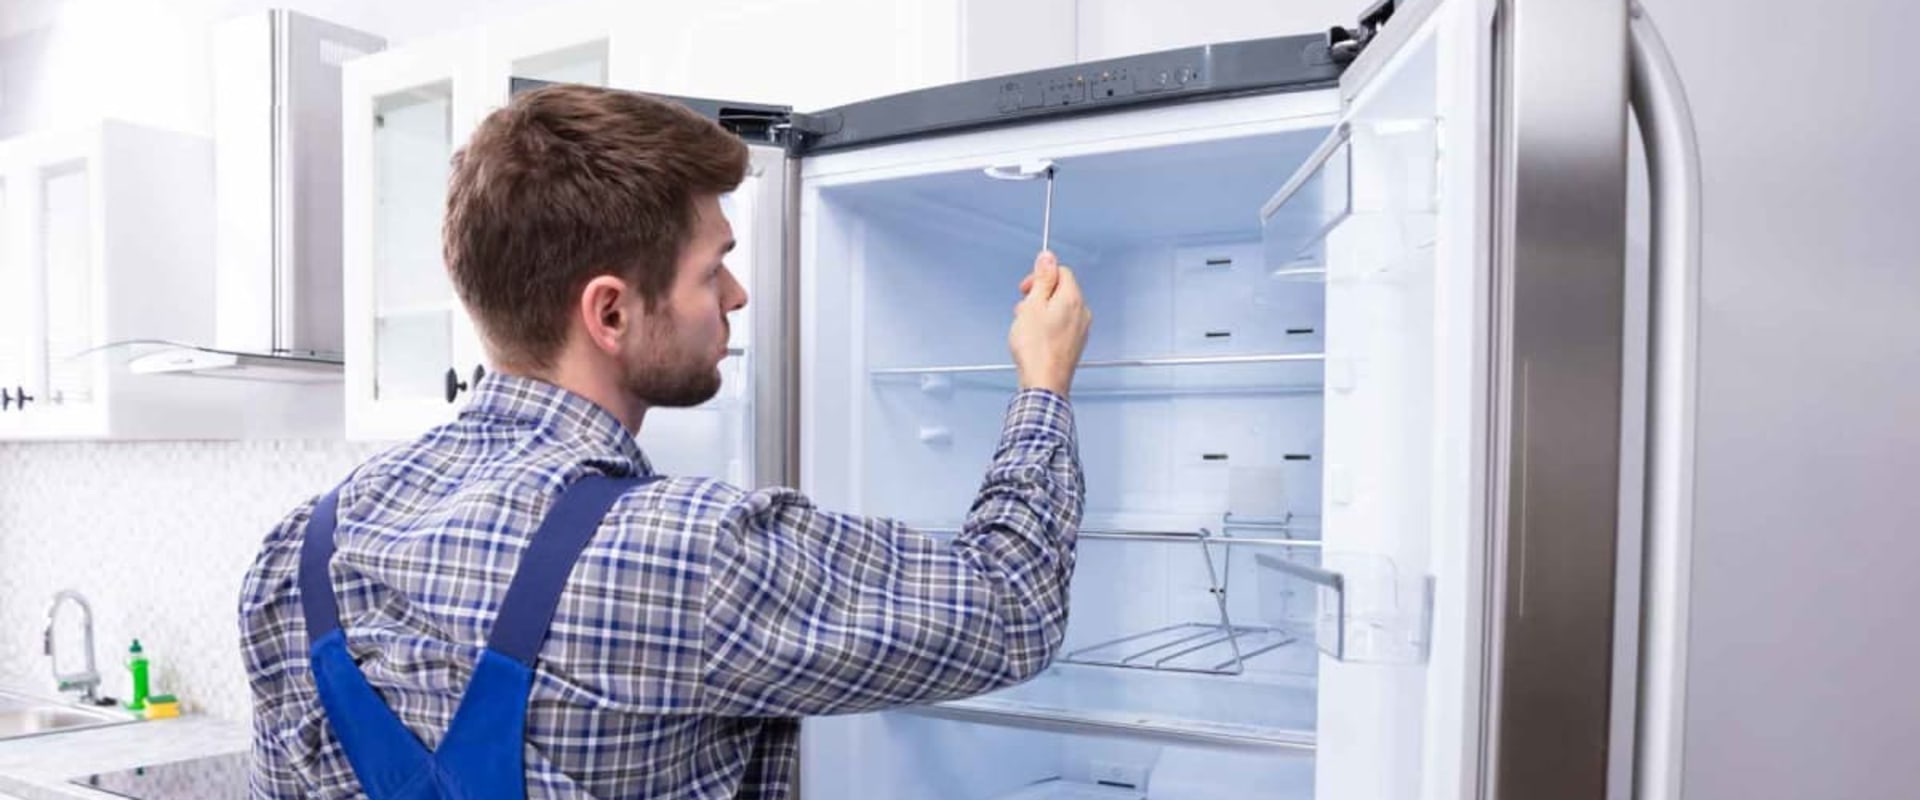 Should You Repair or Replace Your 10-Year-Old Refrigerator?